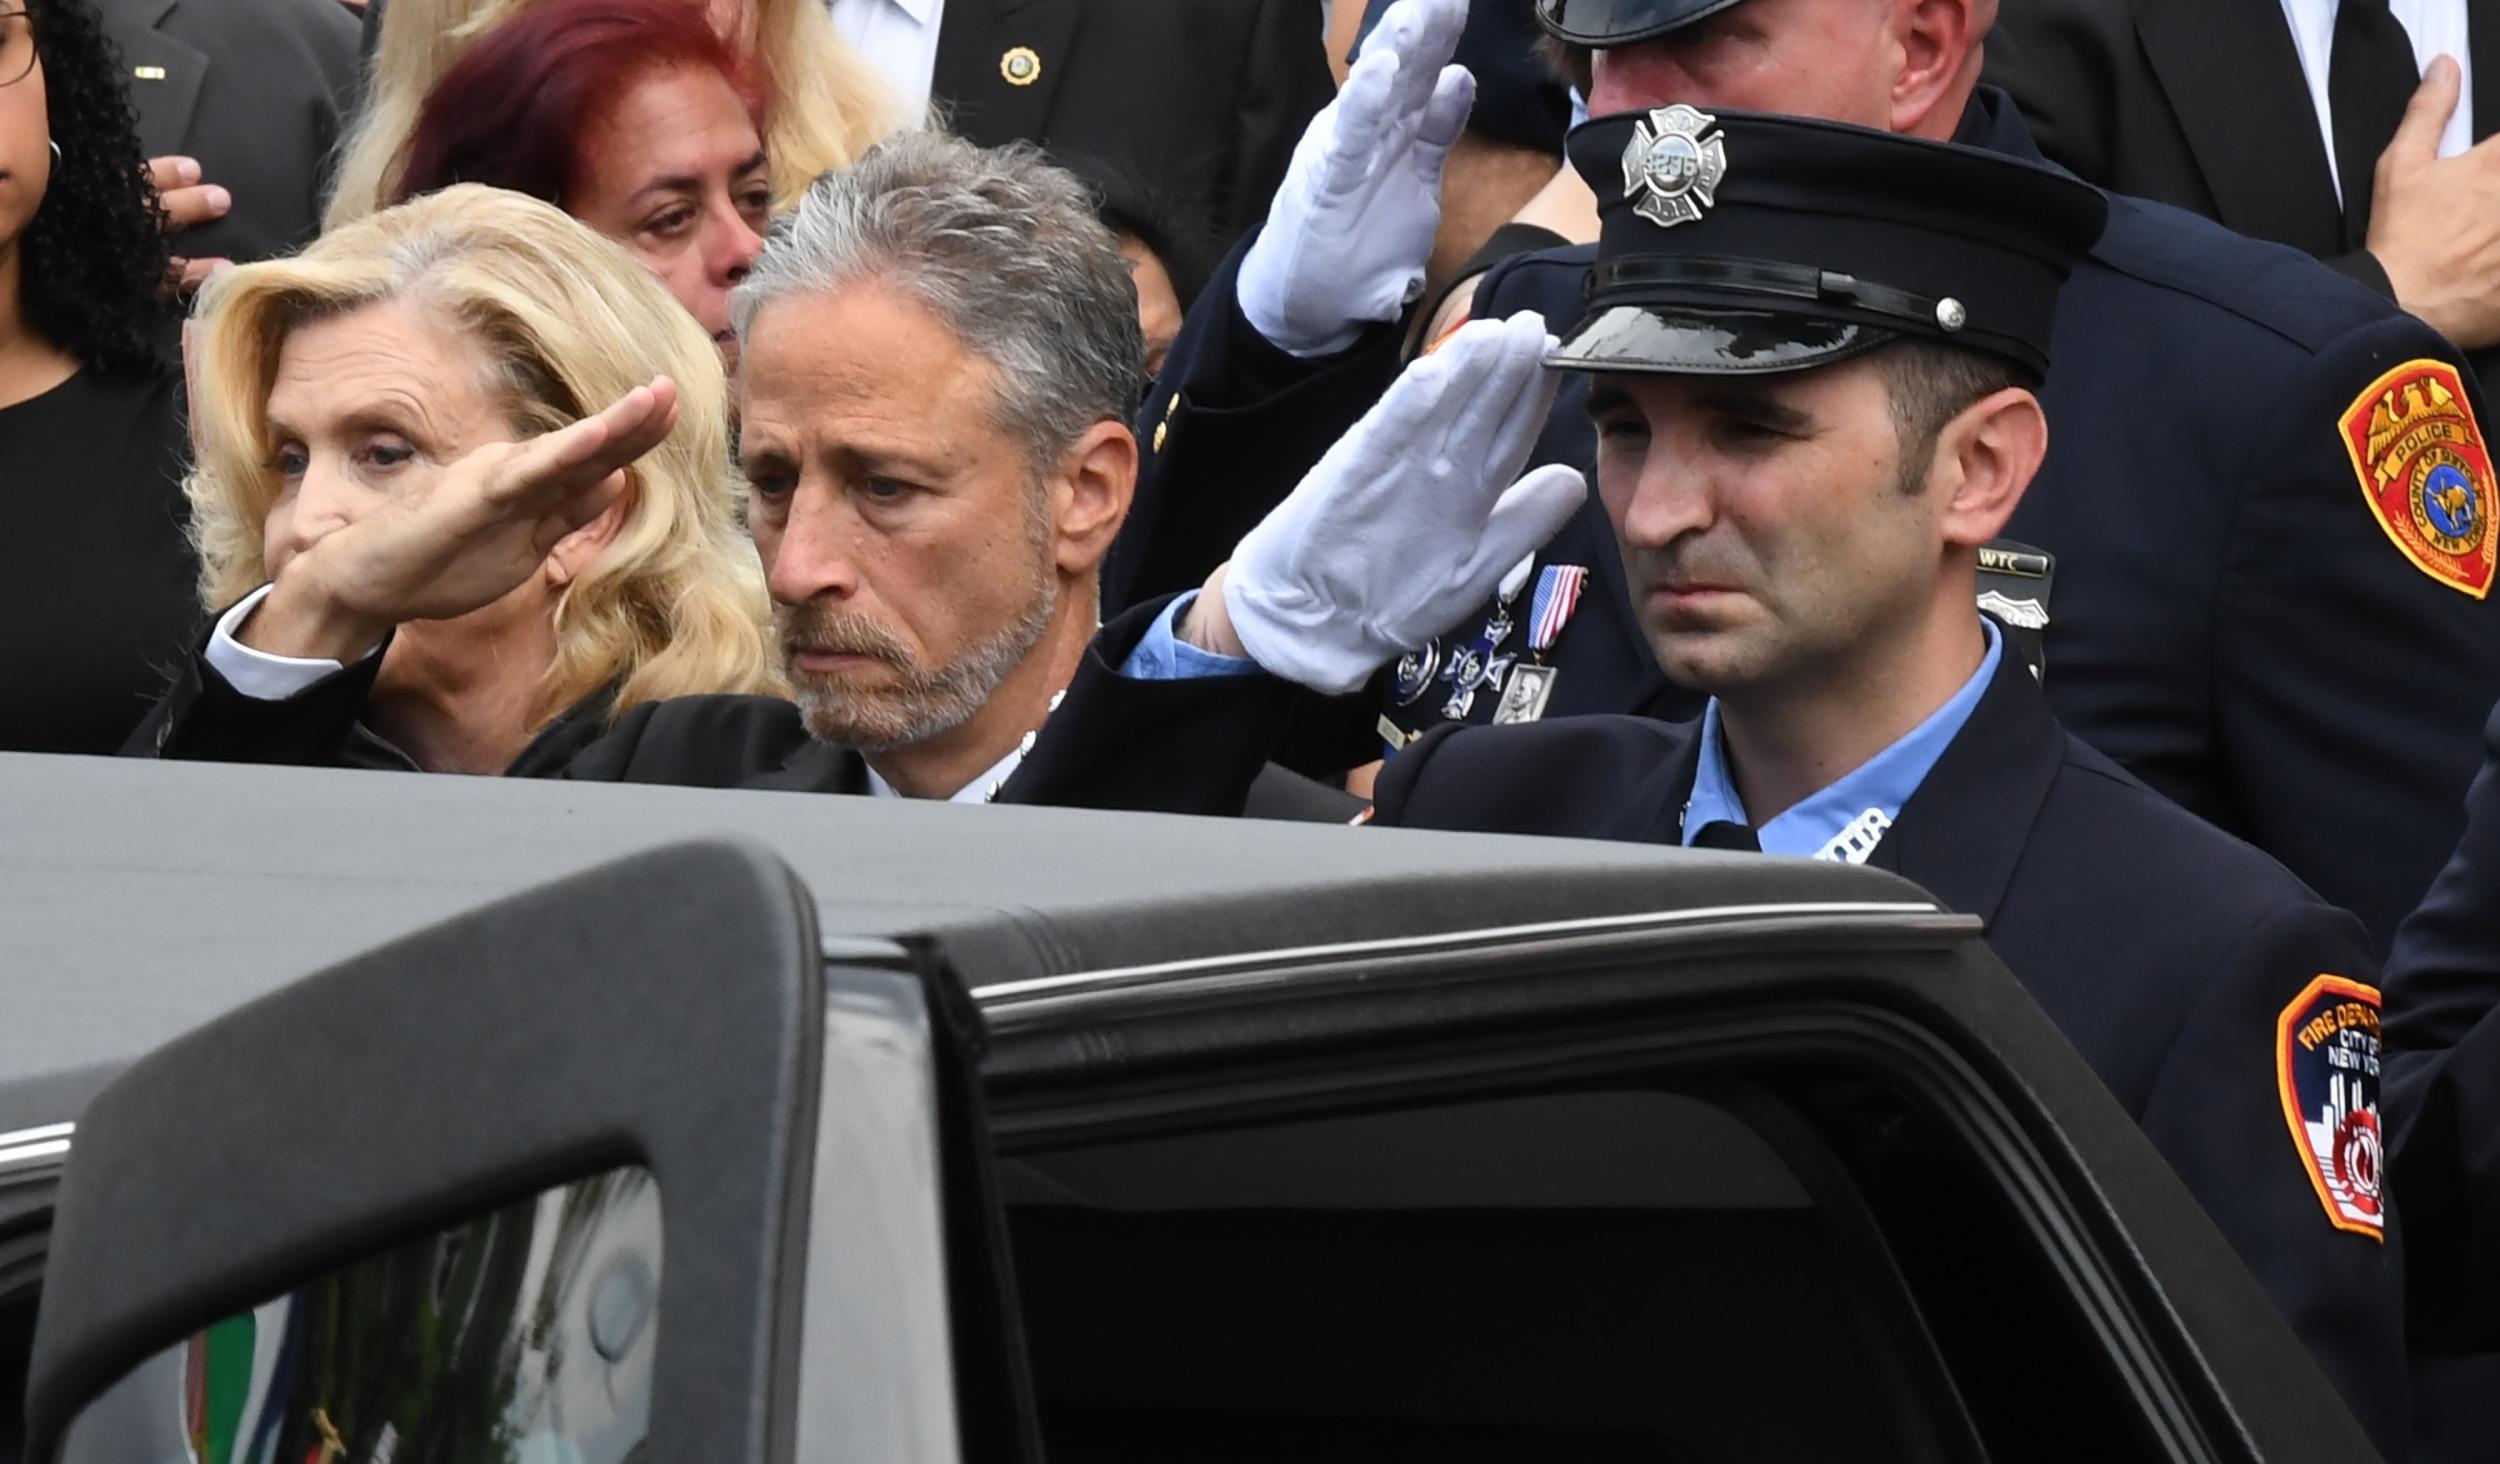 Jon Stewart and New York Representative Carolyn Maloney attend the funeral mass at Immaculate Conception Church in Astoria, Queens